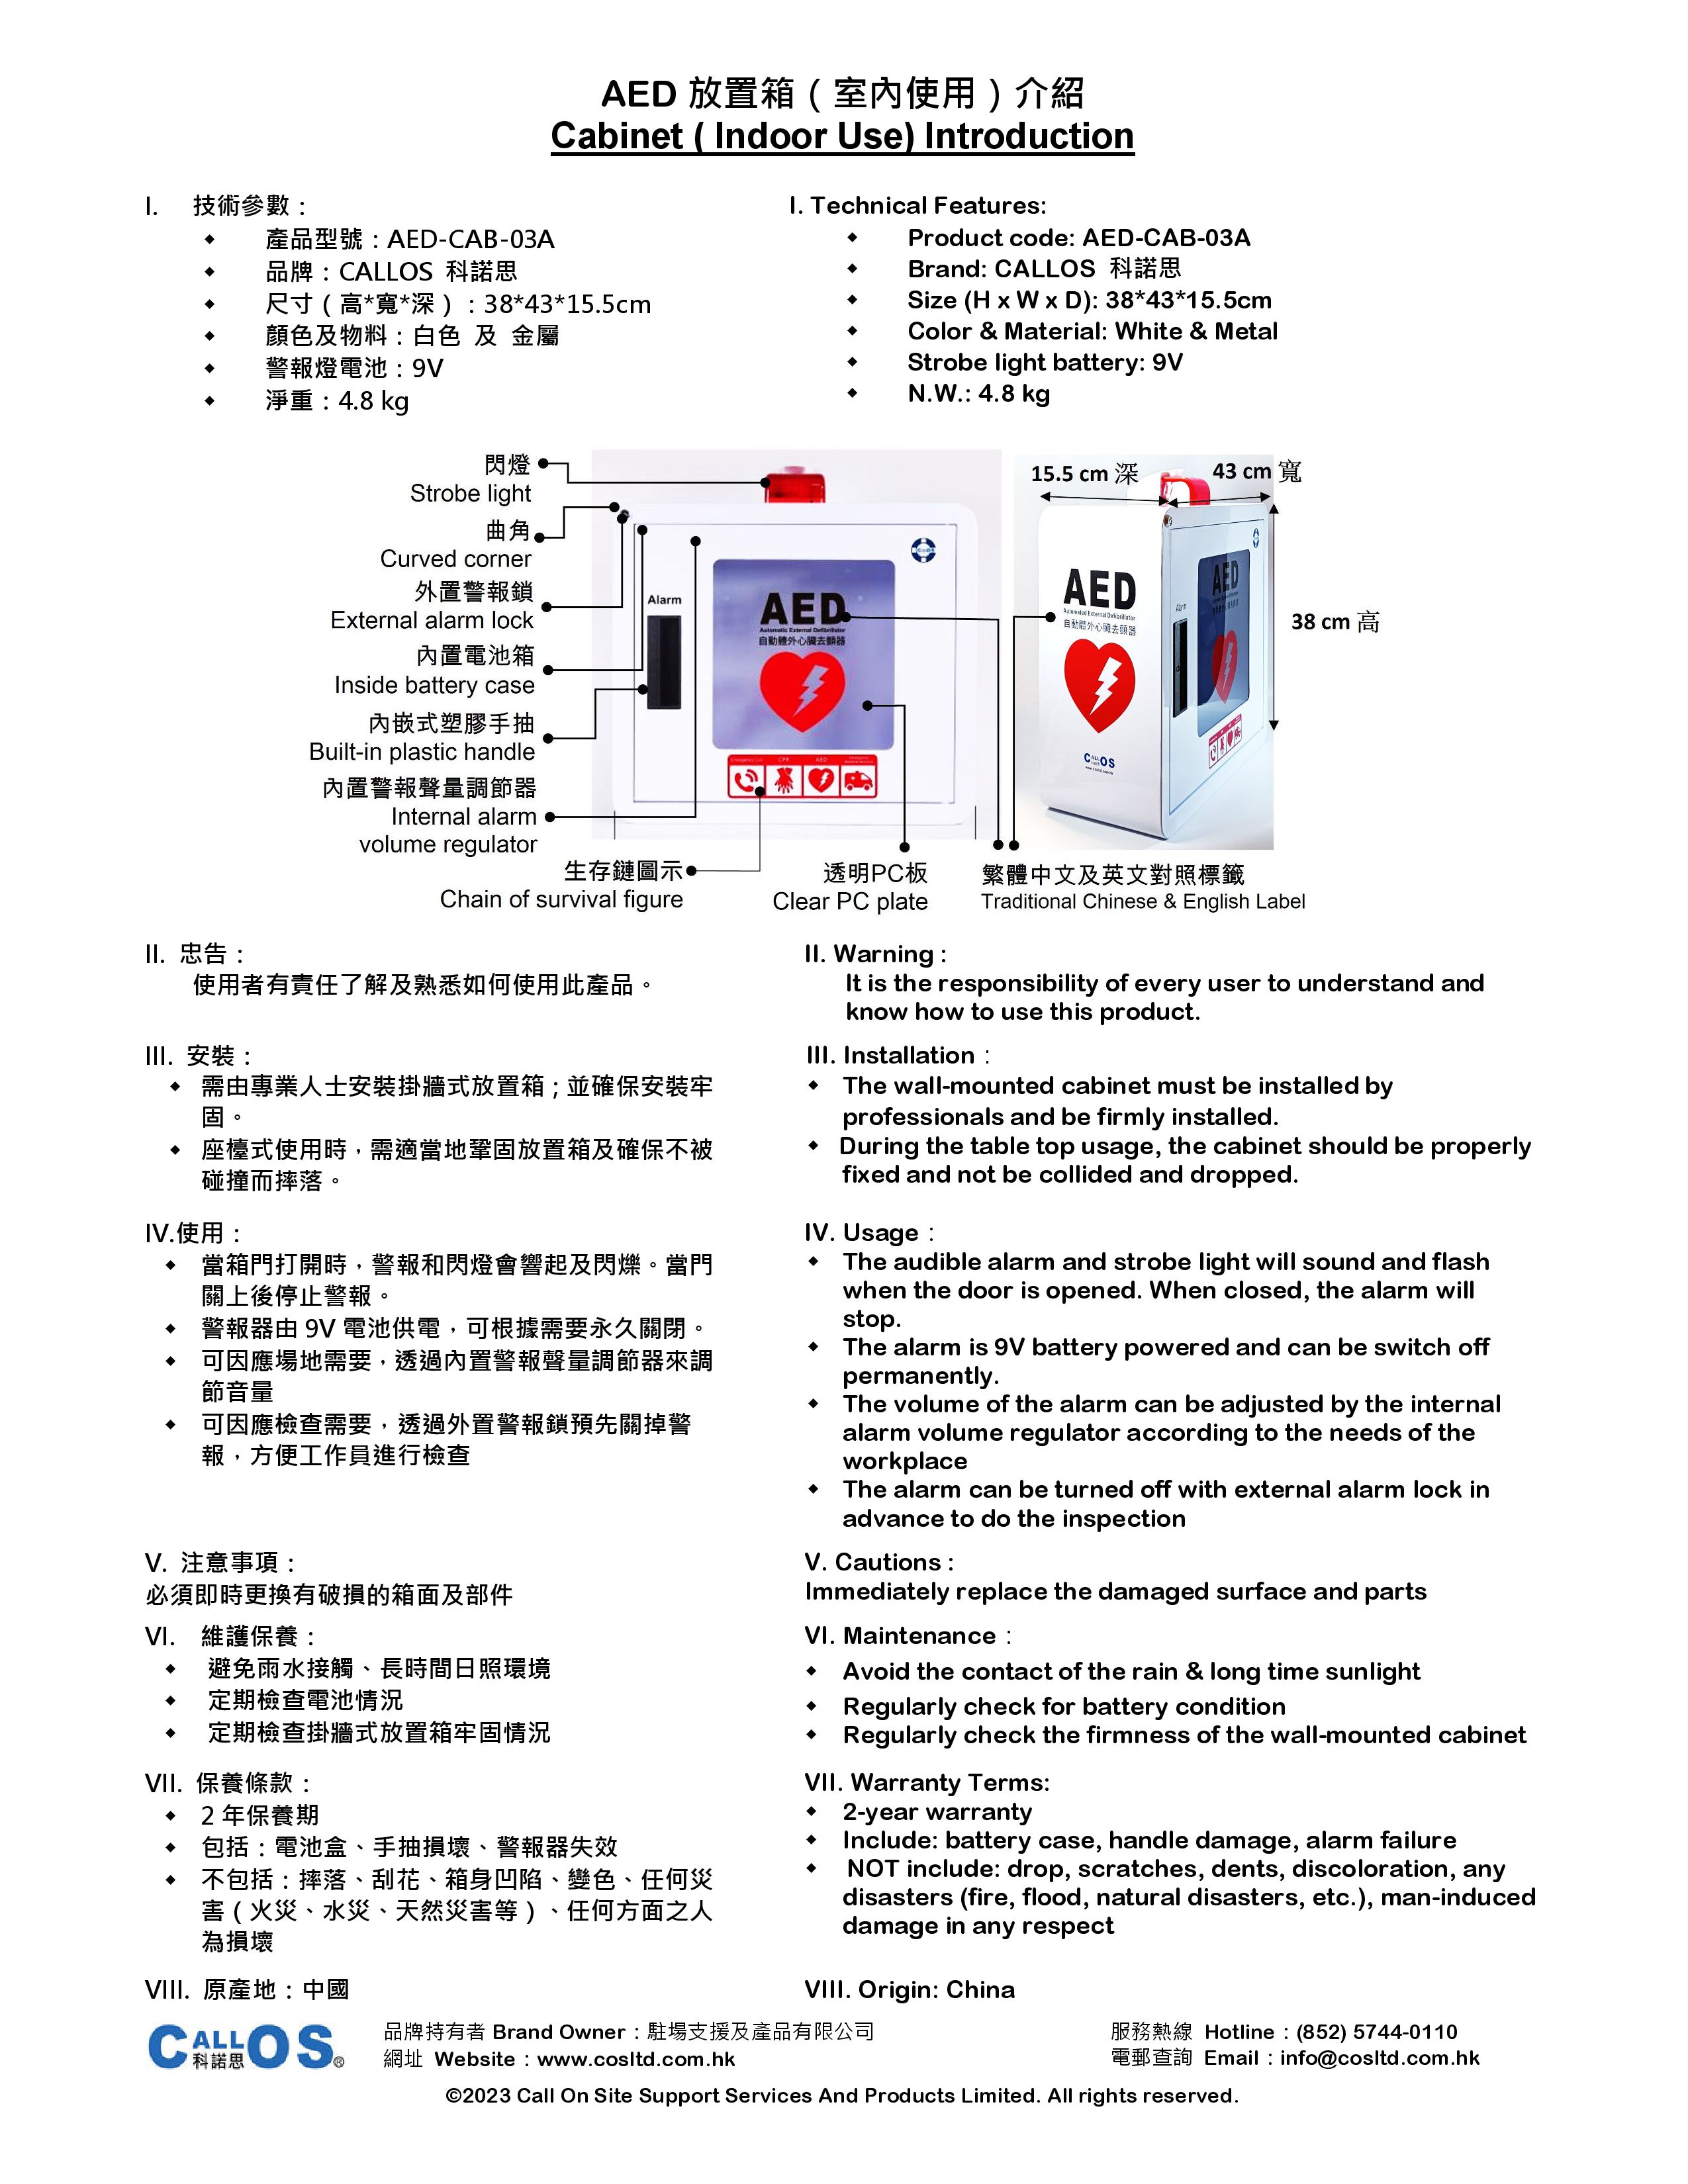 Cabinet AED-CAB-03A